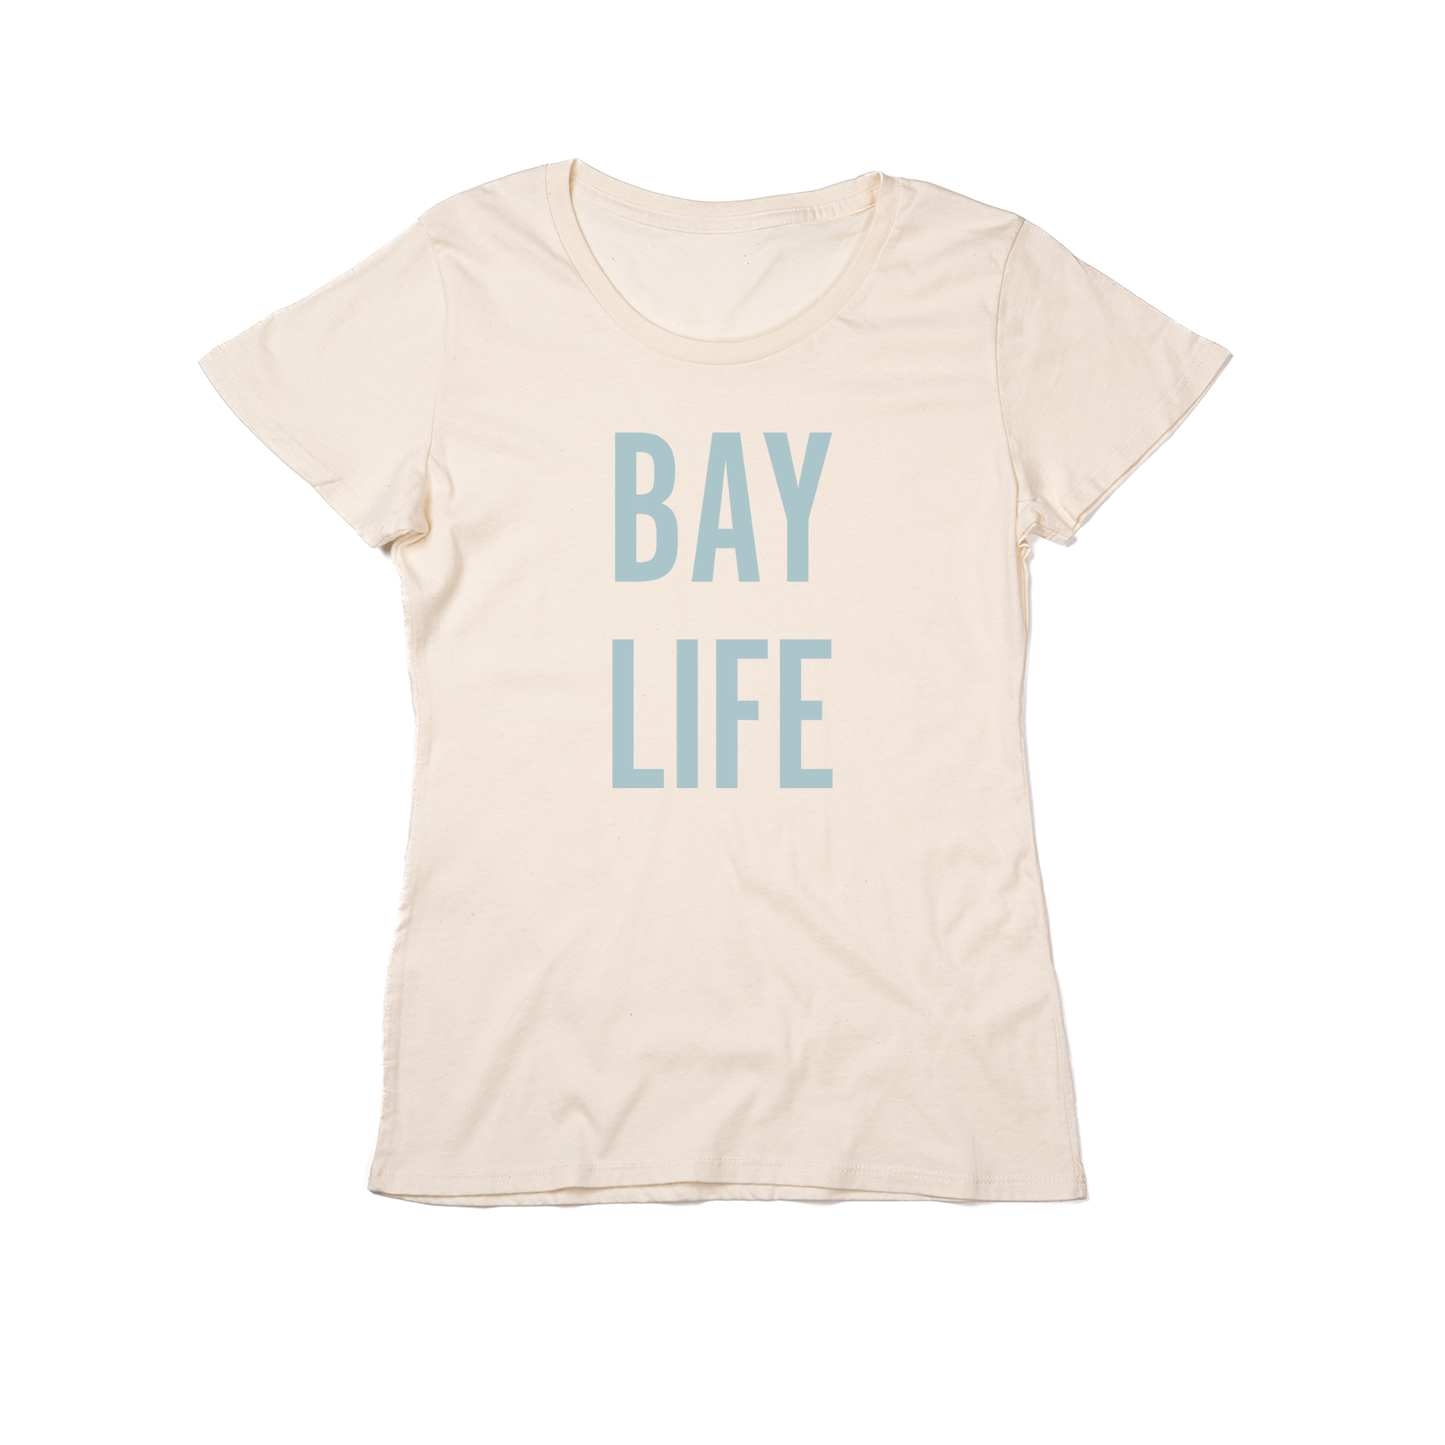 Bay Life (Sky) - Women's Fitted Tee (Natural)